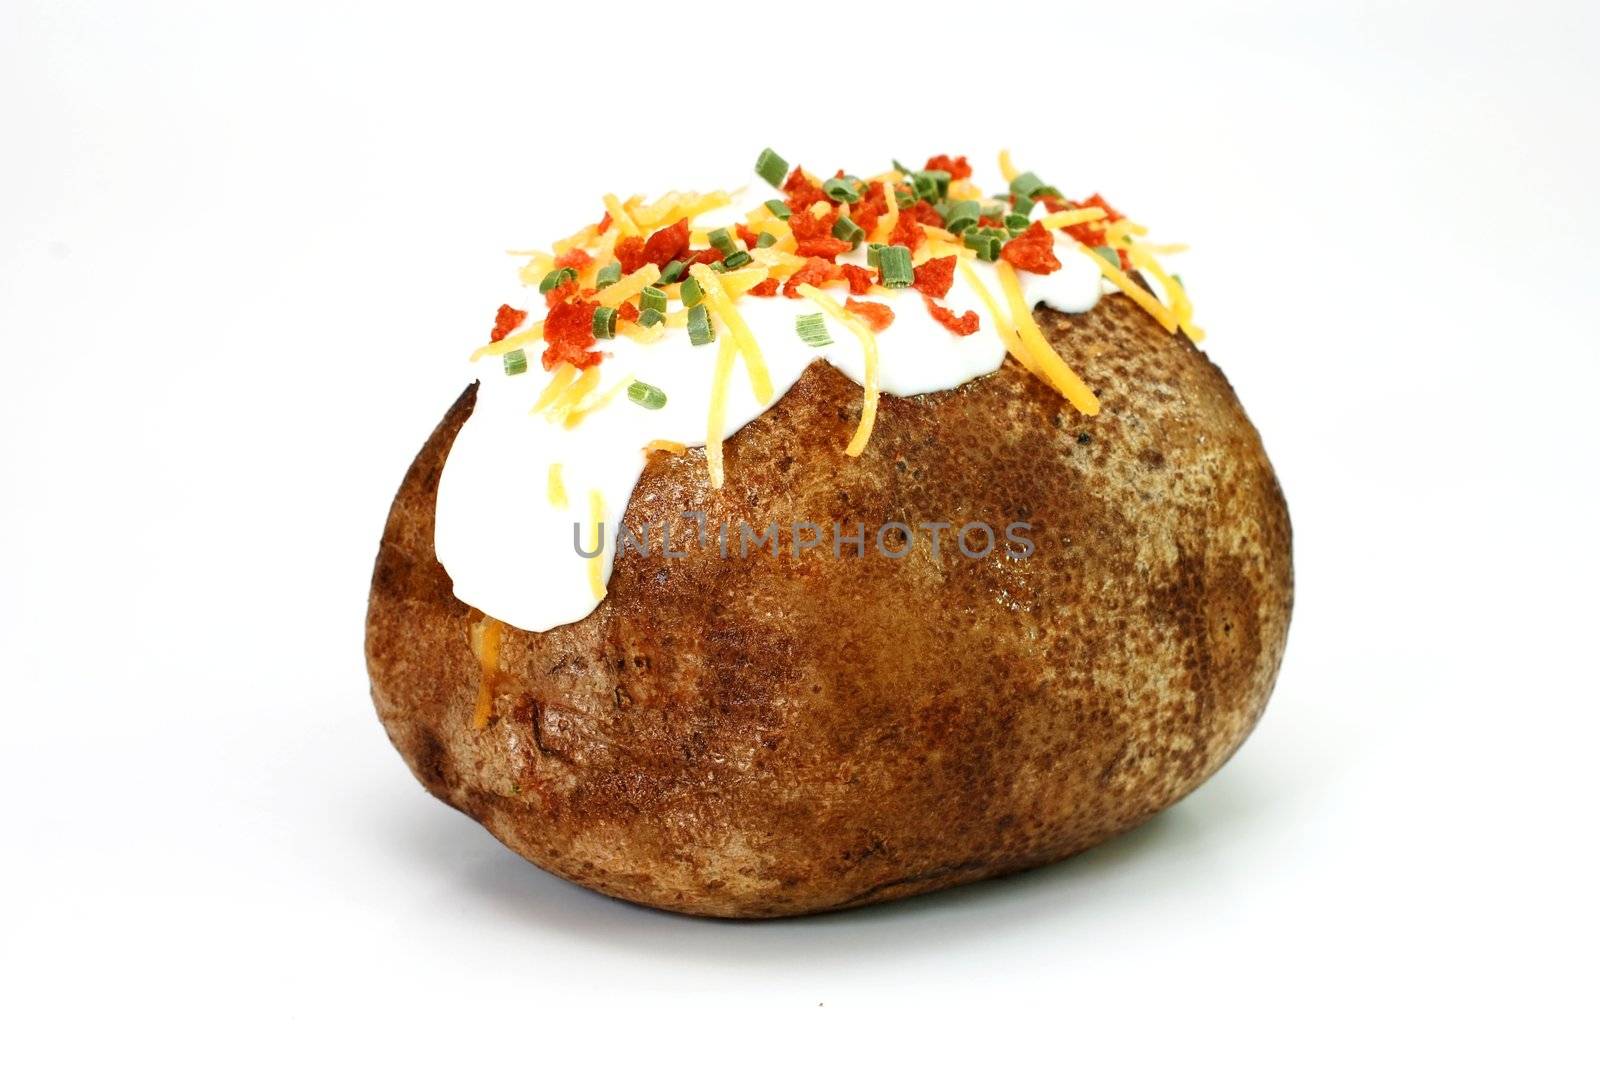 Baked potato loaded with butter, sour cream, cheddar cheese, bacon bits, and chives.  Isolated on white background.